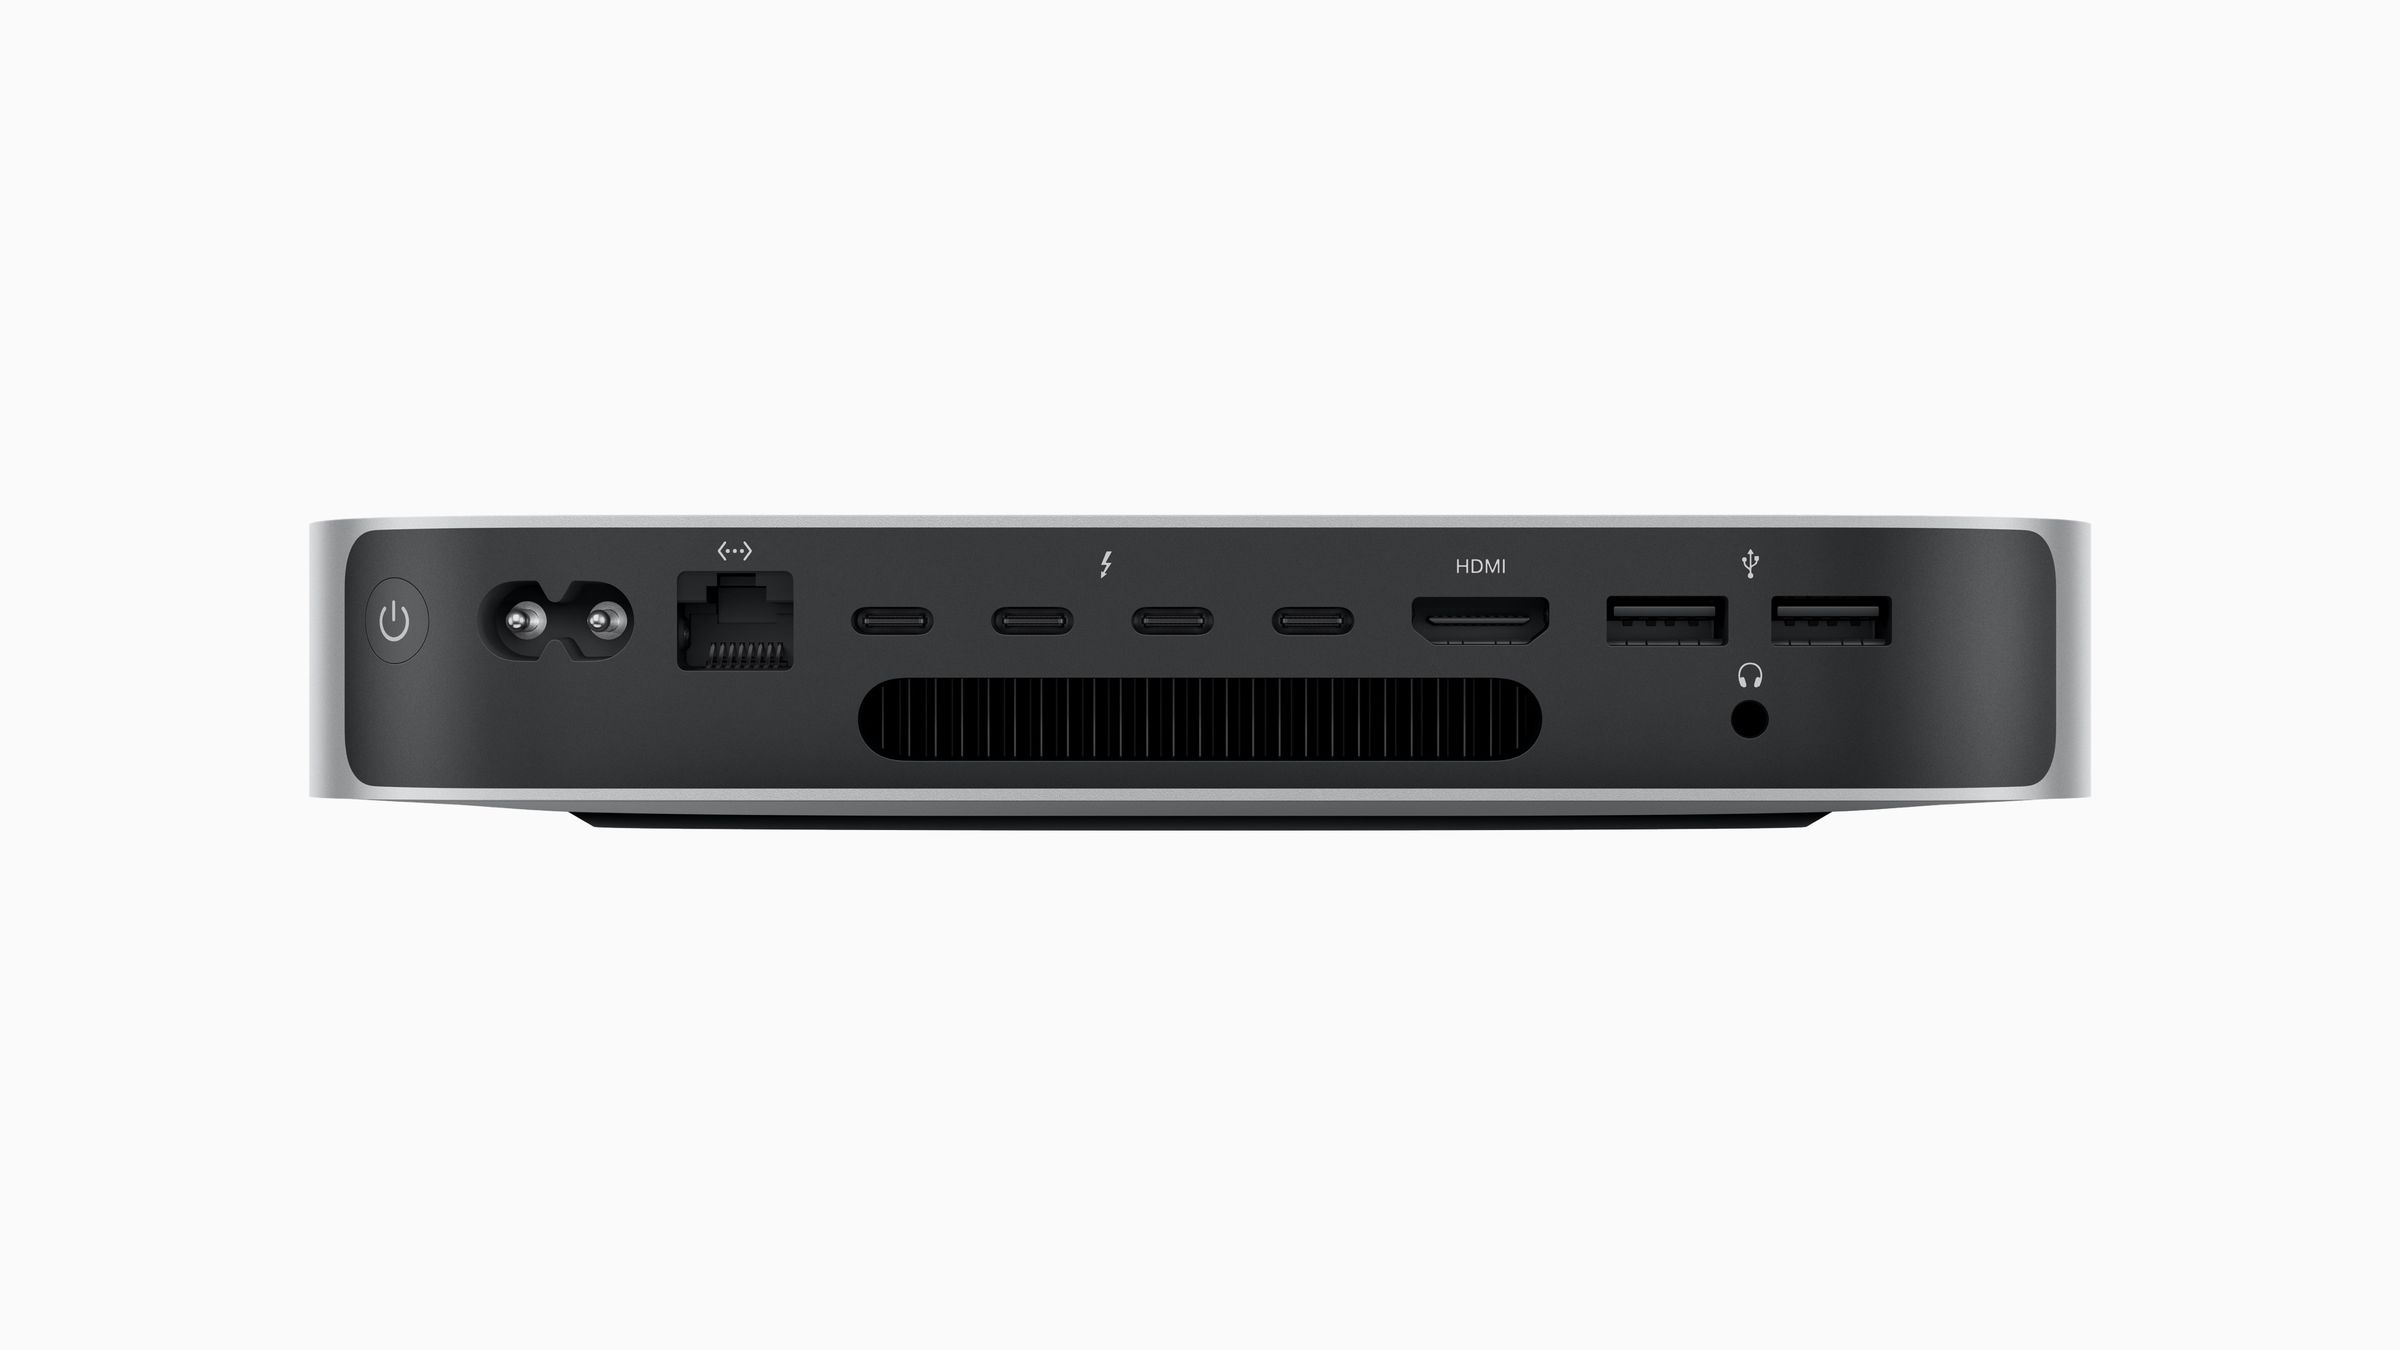 That’s some lovely I/O on the back of the M2 Pro Mac Mini. If only it had an SD card slot as well.